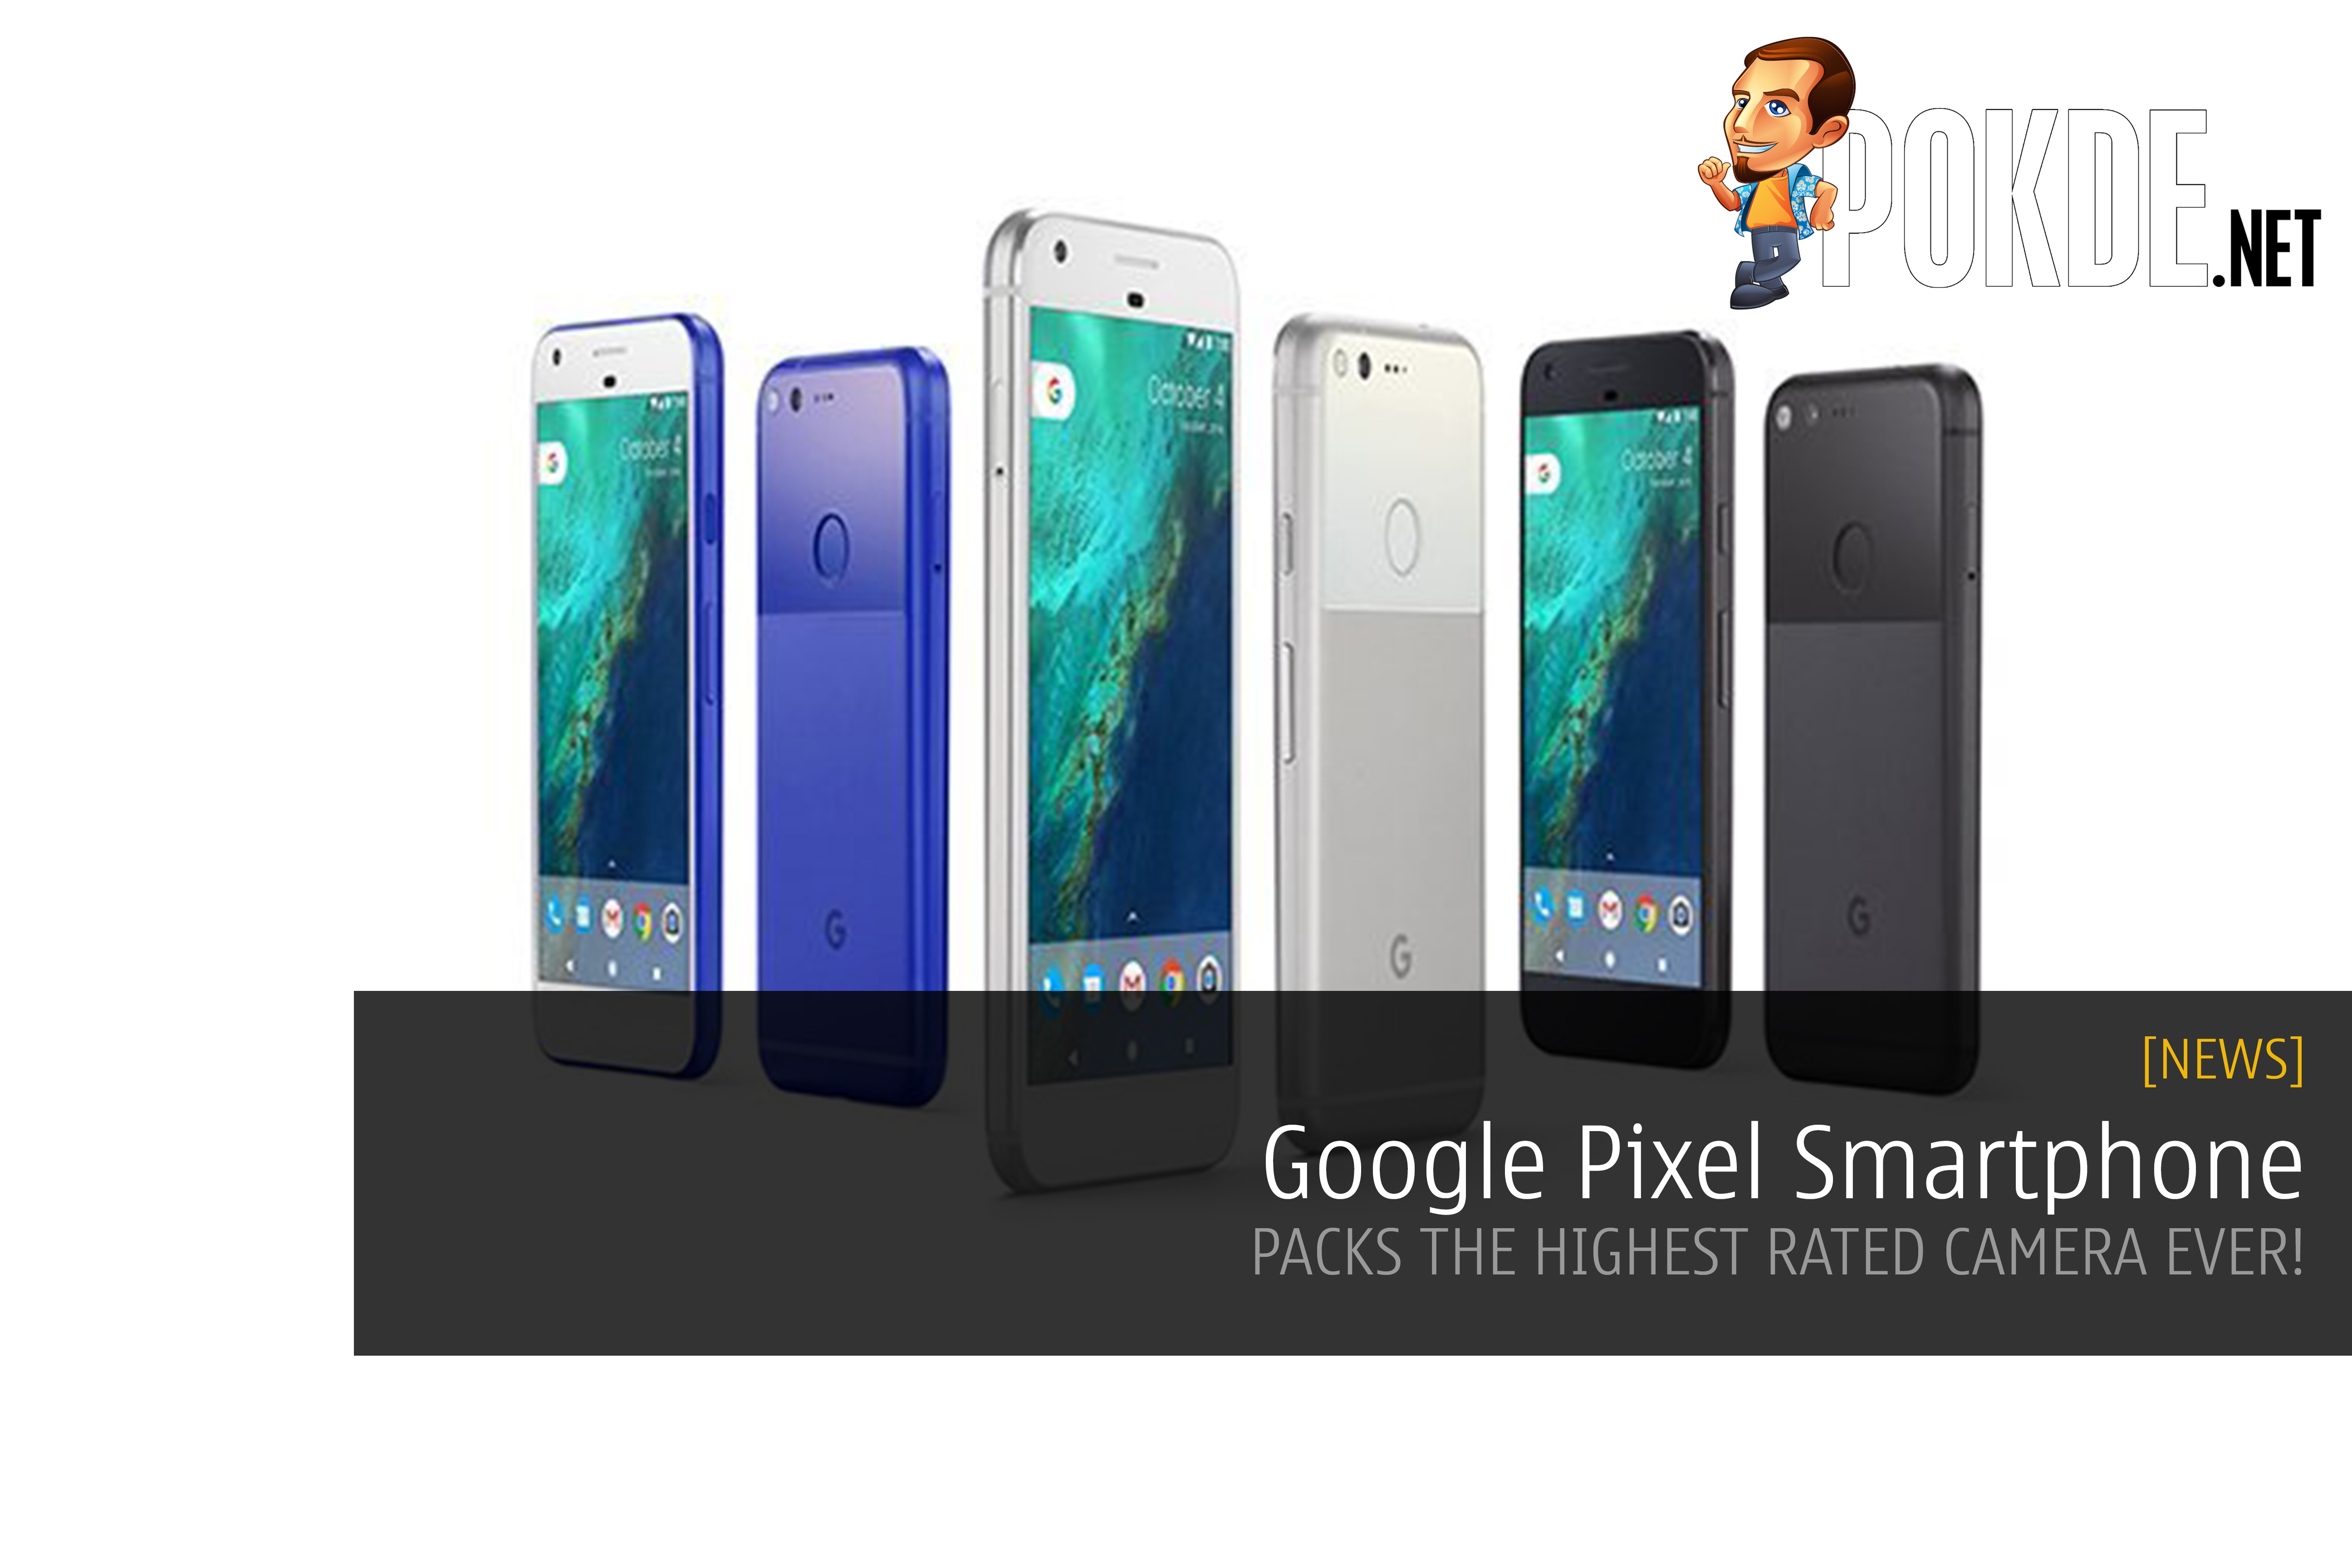 Google Pixel smartphone "made by Google" packs the highest rated camera ever 36